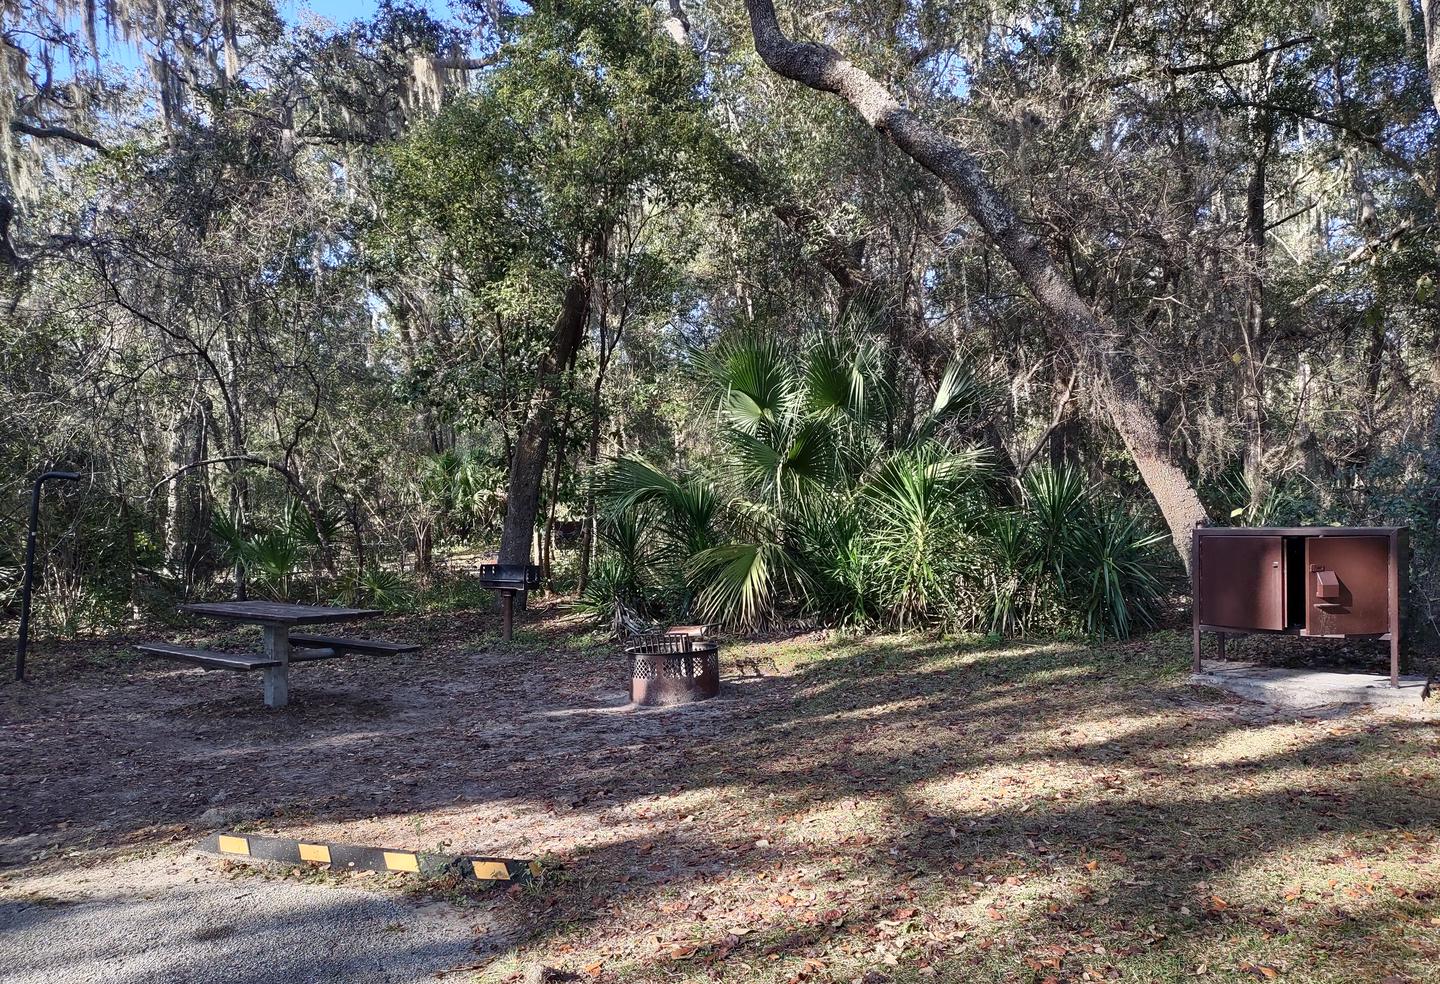 View of site 21Amenities: picnic table, grill, fire ring, light pole, bear-proof storage locker